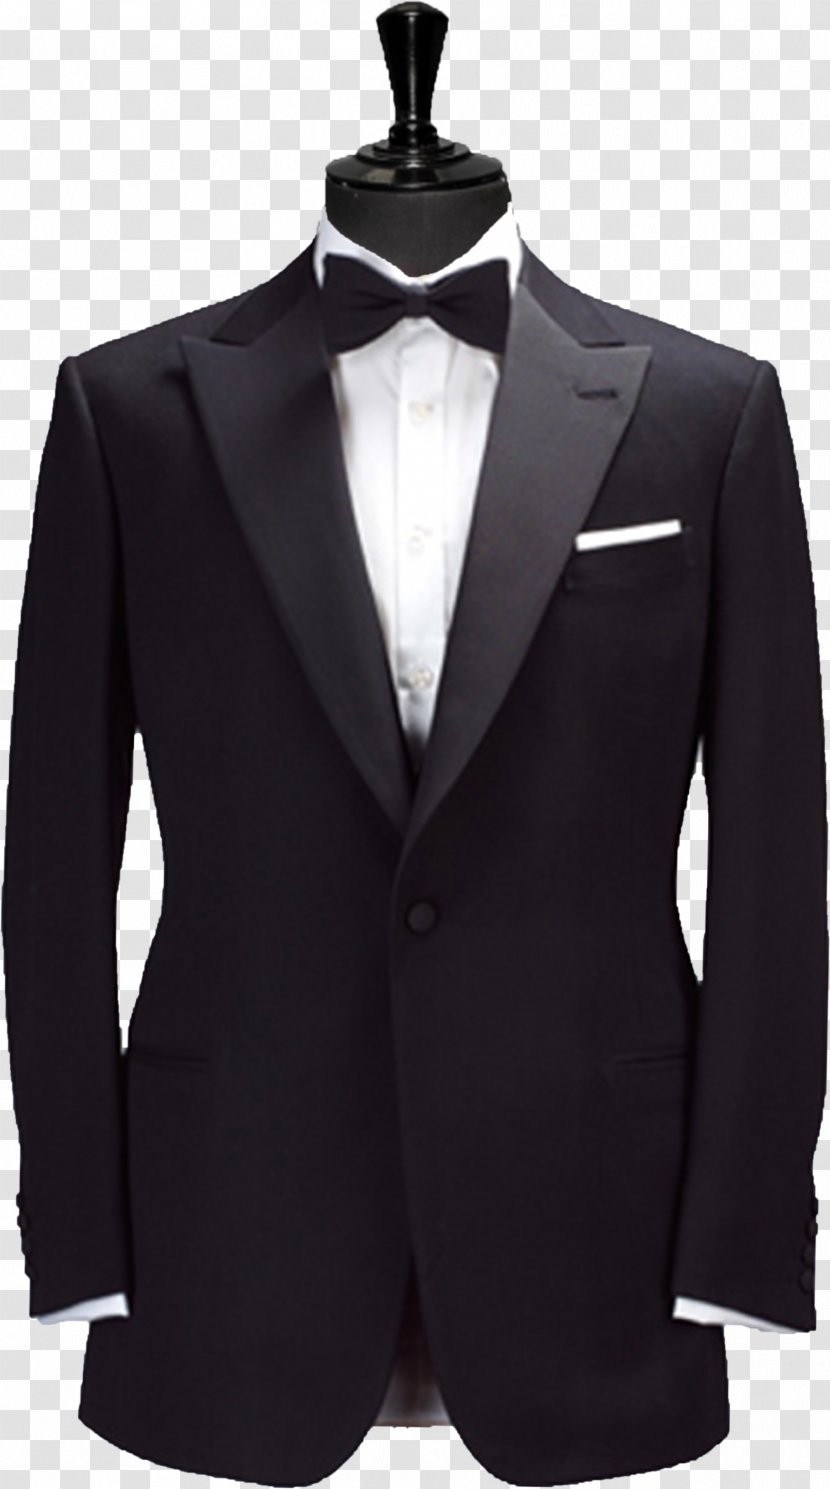 Savile Row Tuxedo Suit Henry Poole & Co Tailor - Pin Transparent PNG